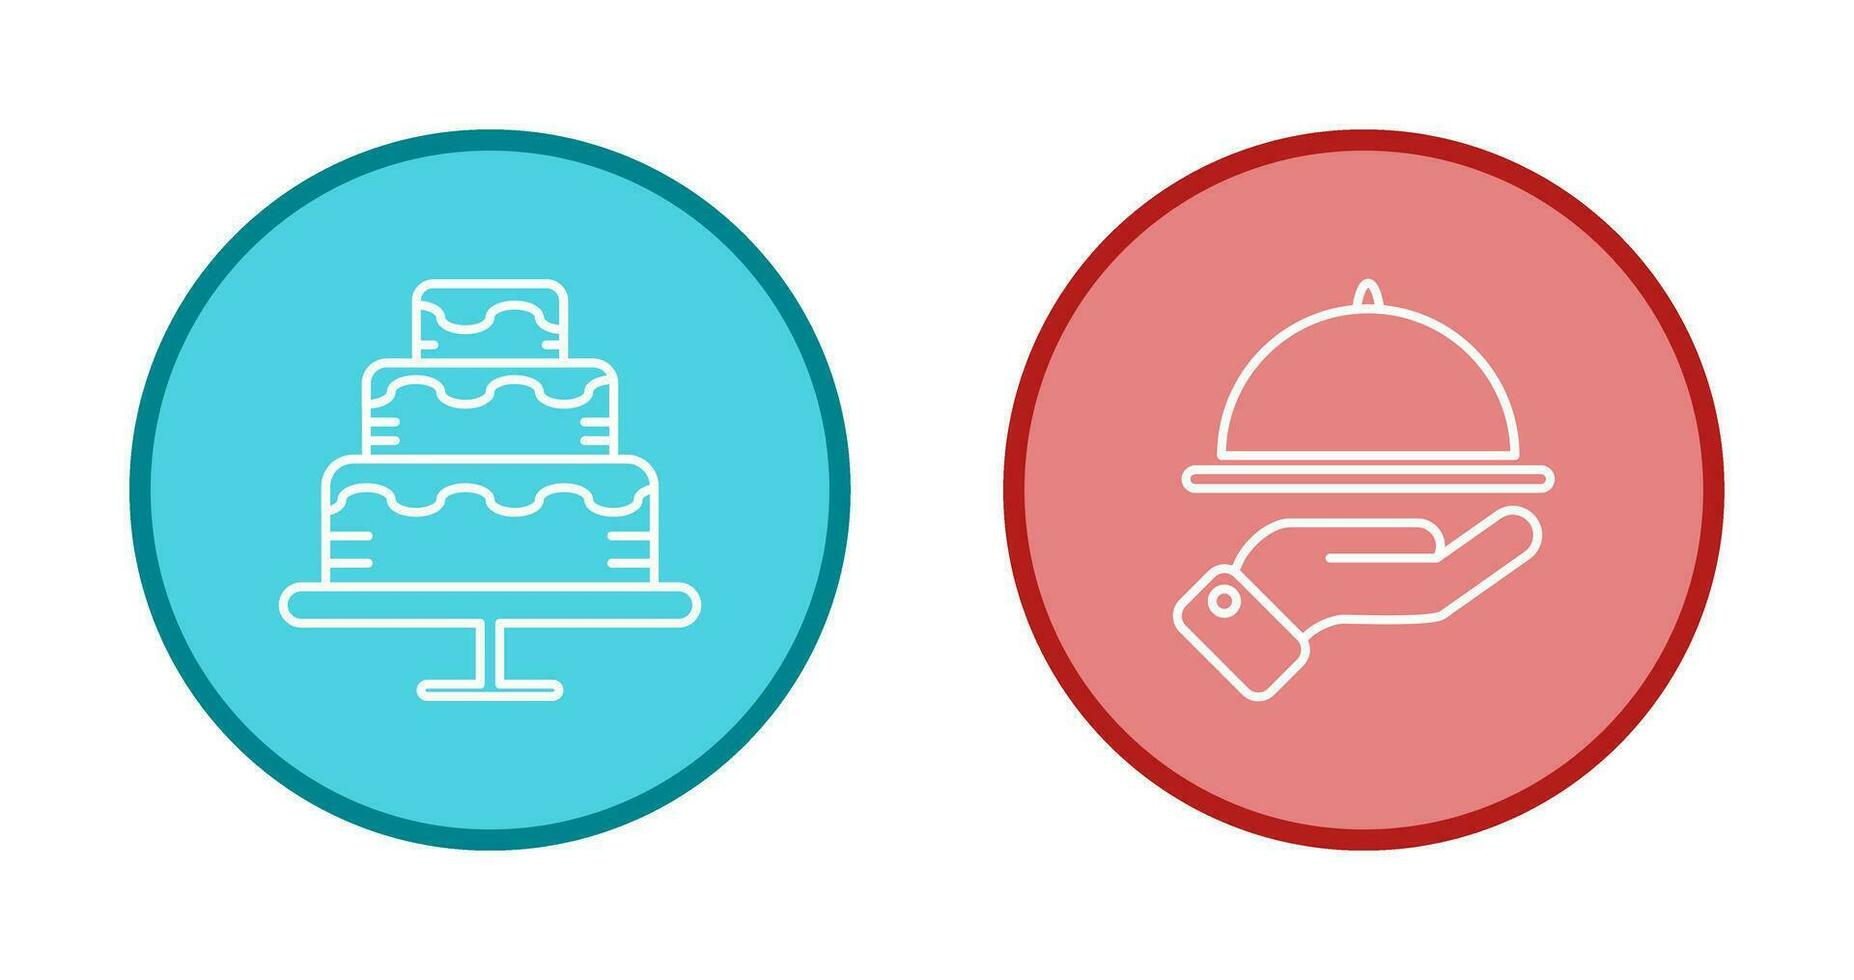 Waiter and Cake Icon vector